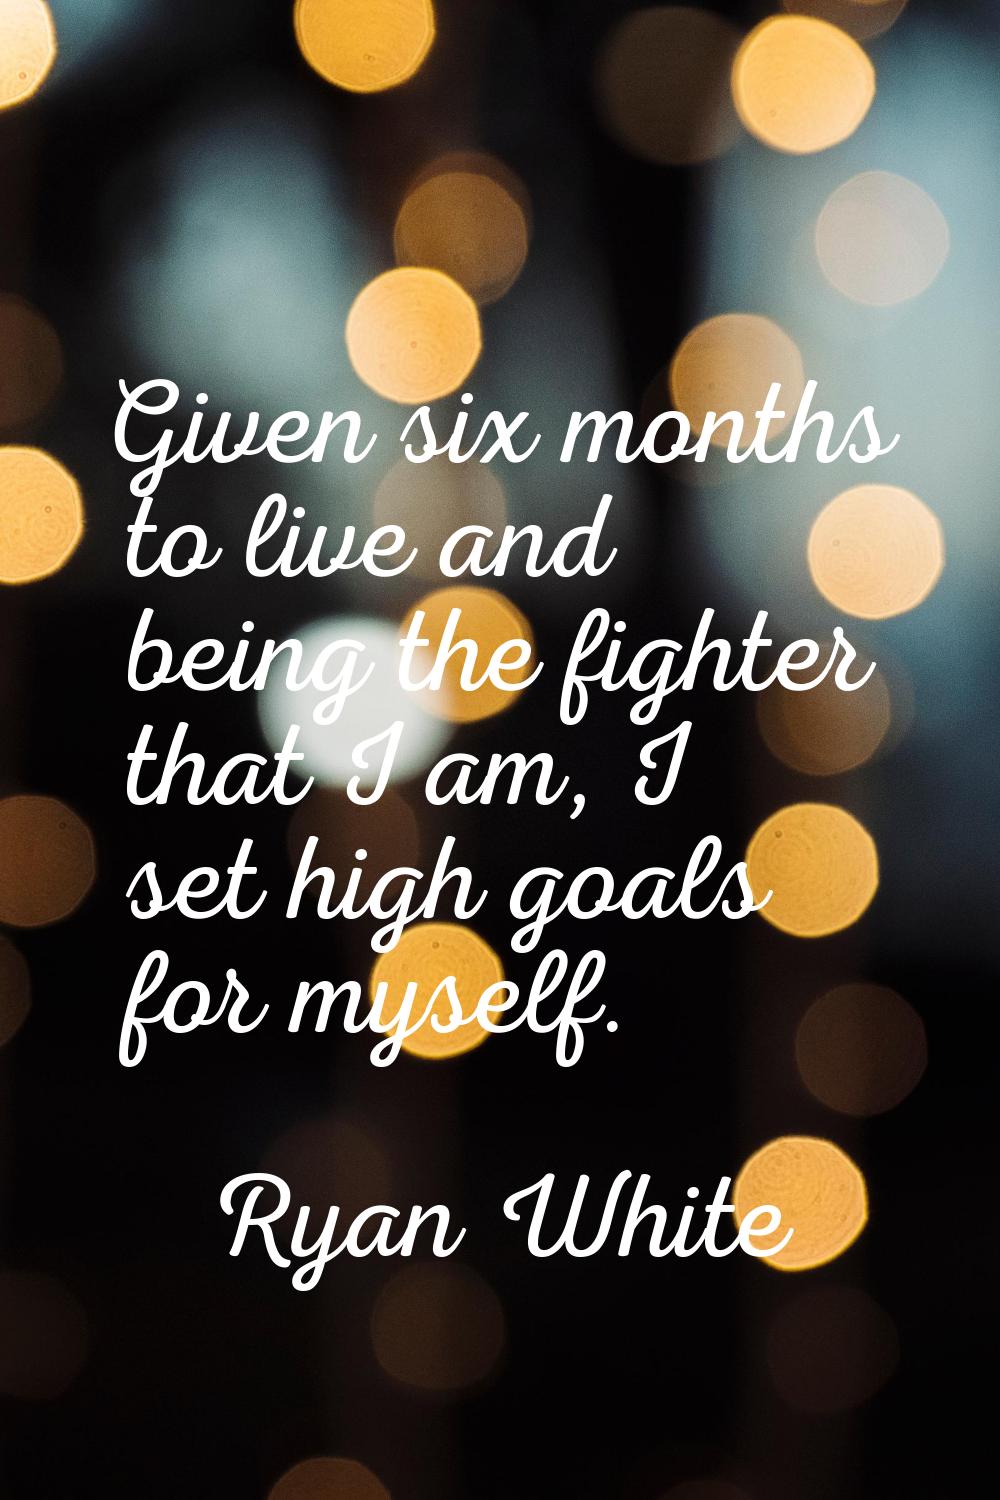 Given six months to live and being the fighter that I am, I set high goals for myself.